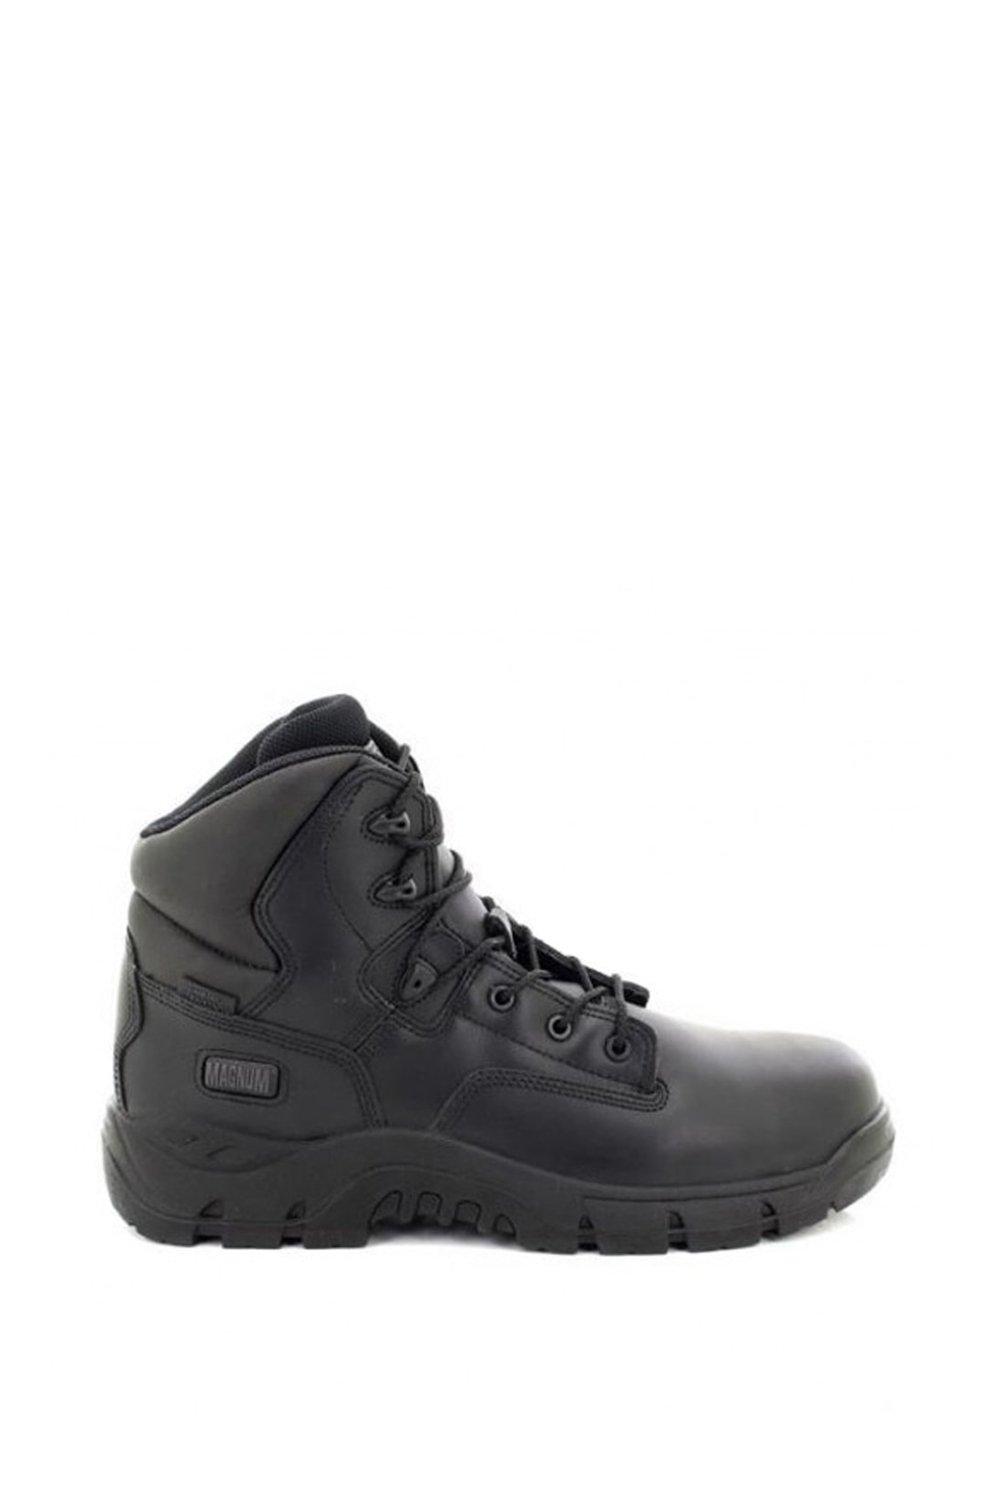 Precision Sitemaster Fully Composite Waterproof Safety Boots